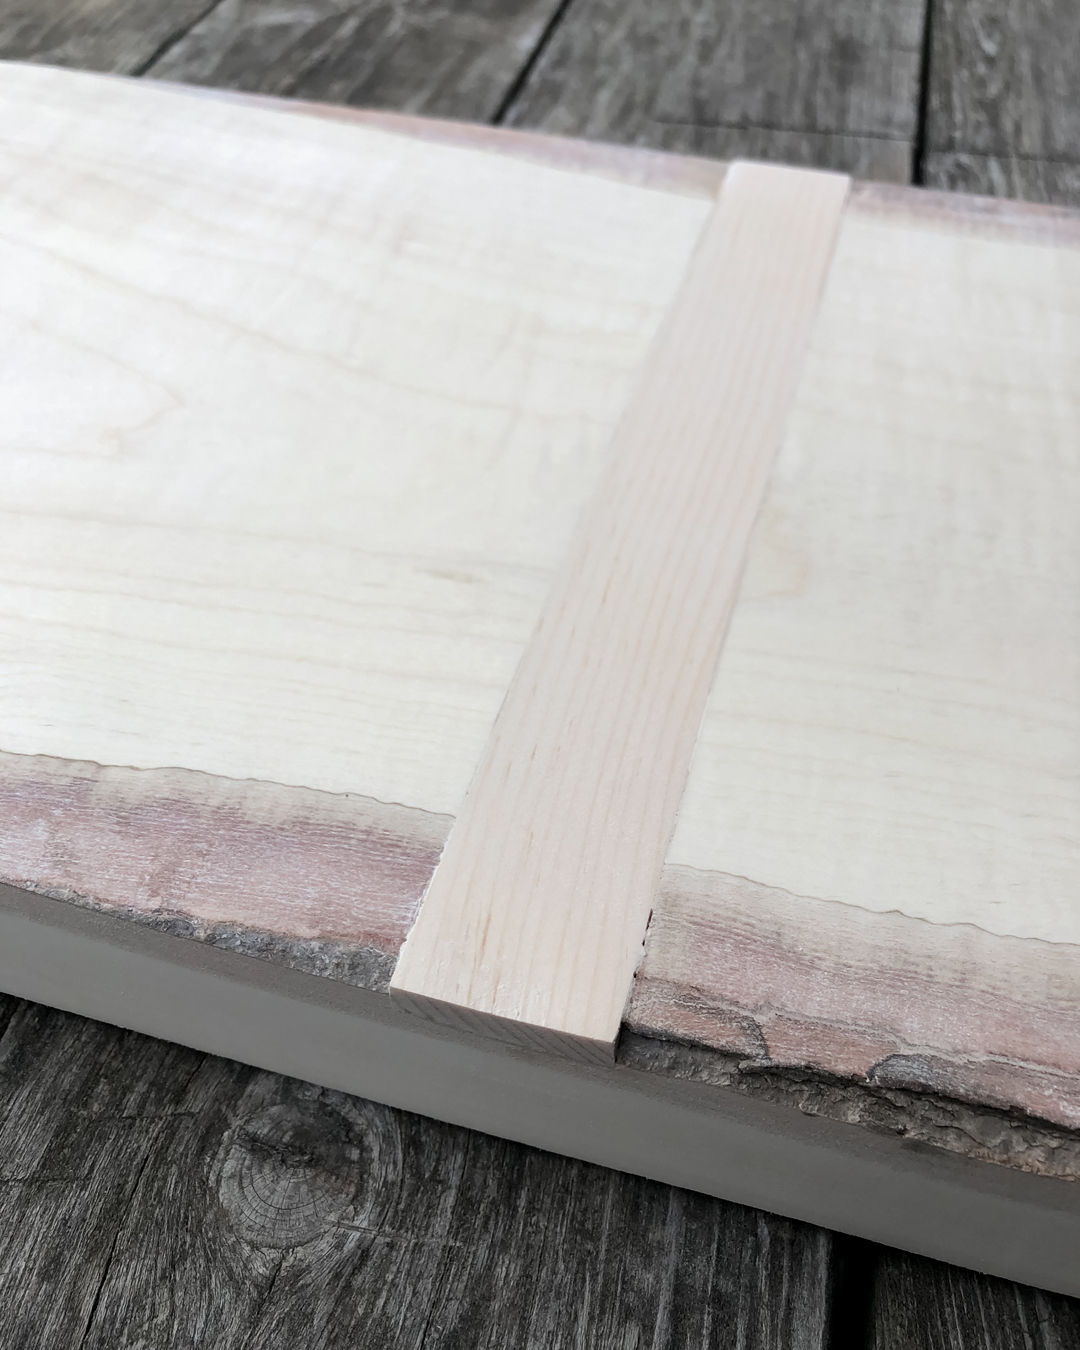 How to make your own DIY giant cutting board to use as kitchen decor. Make it exactly the size you need for much less than you'd pay to buy one!